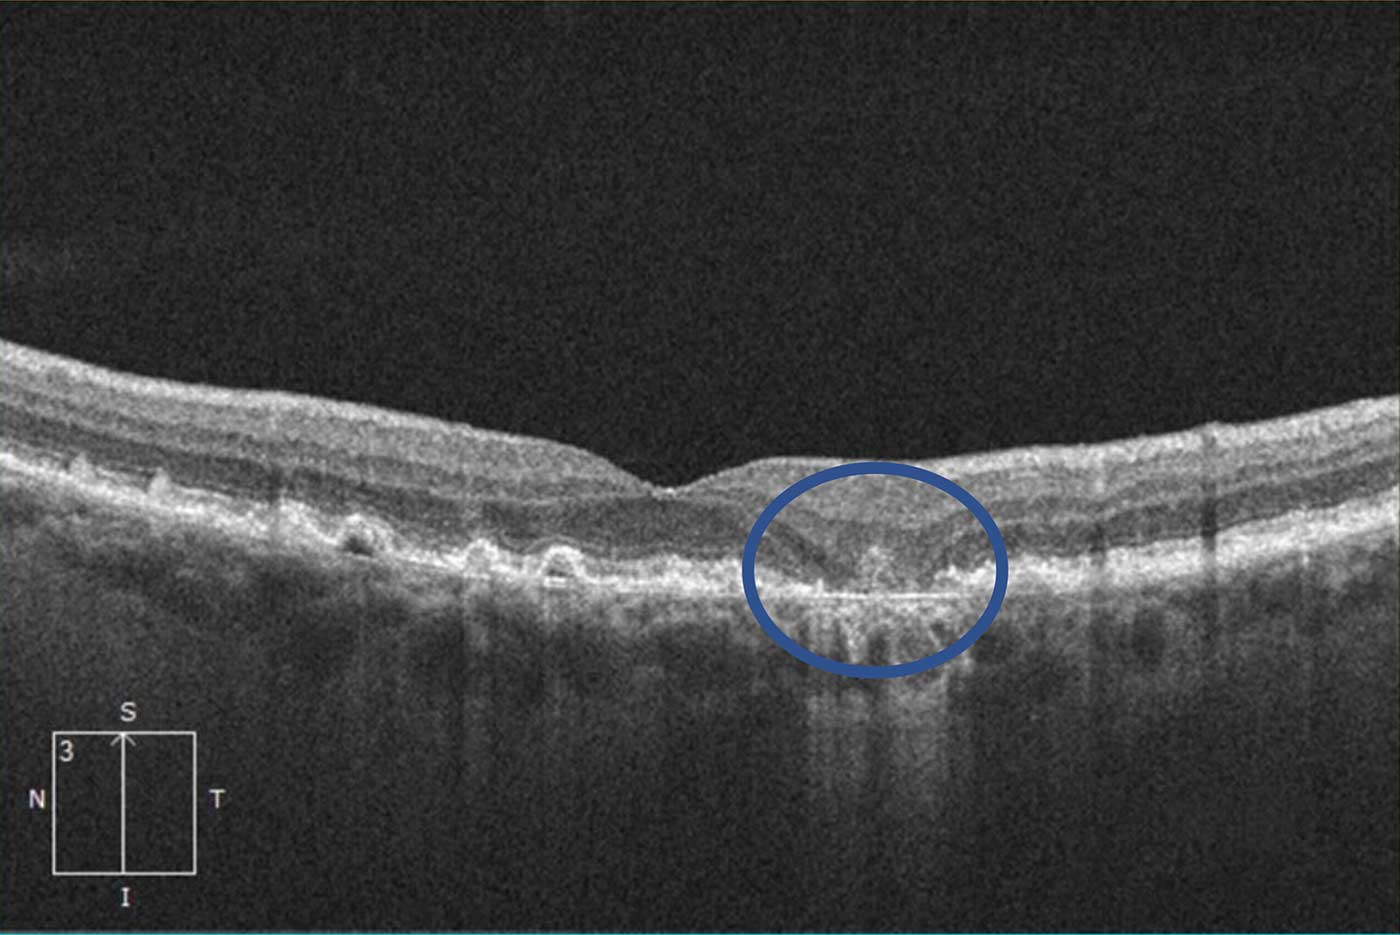 Retinal atrophy causing a blind spot near the central vision in Macular Degeneration.